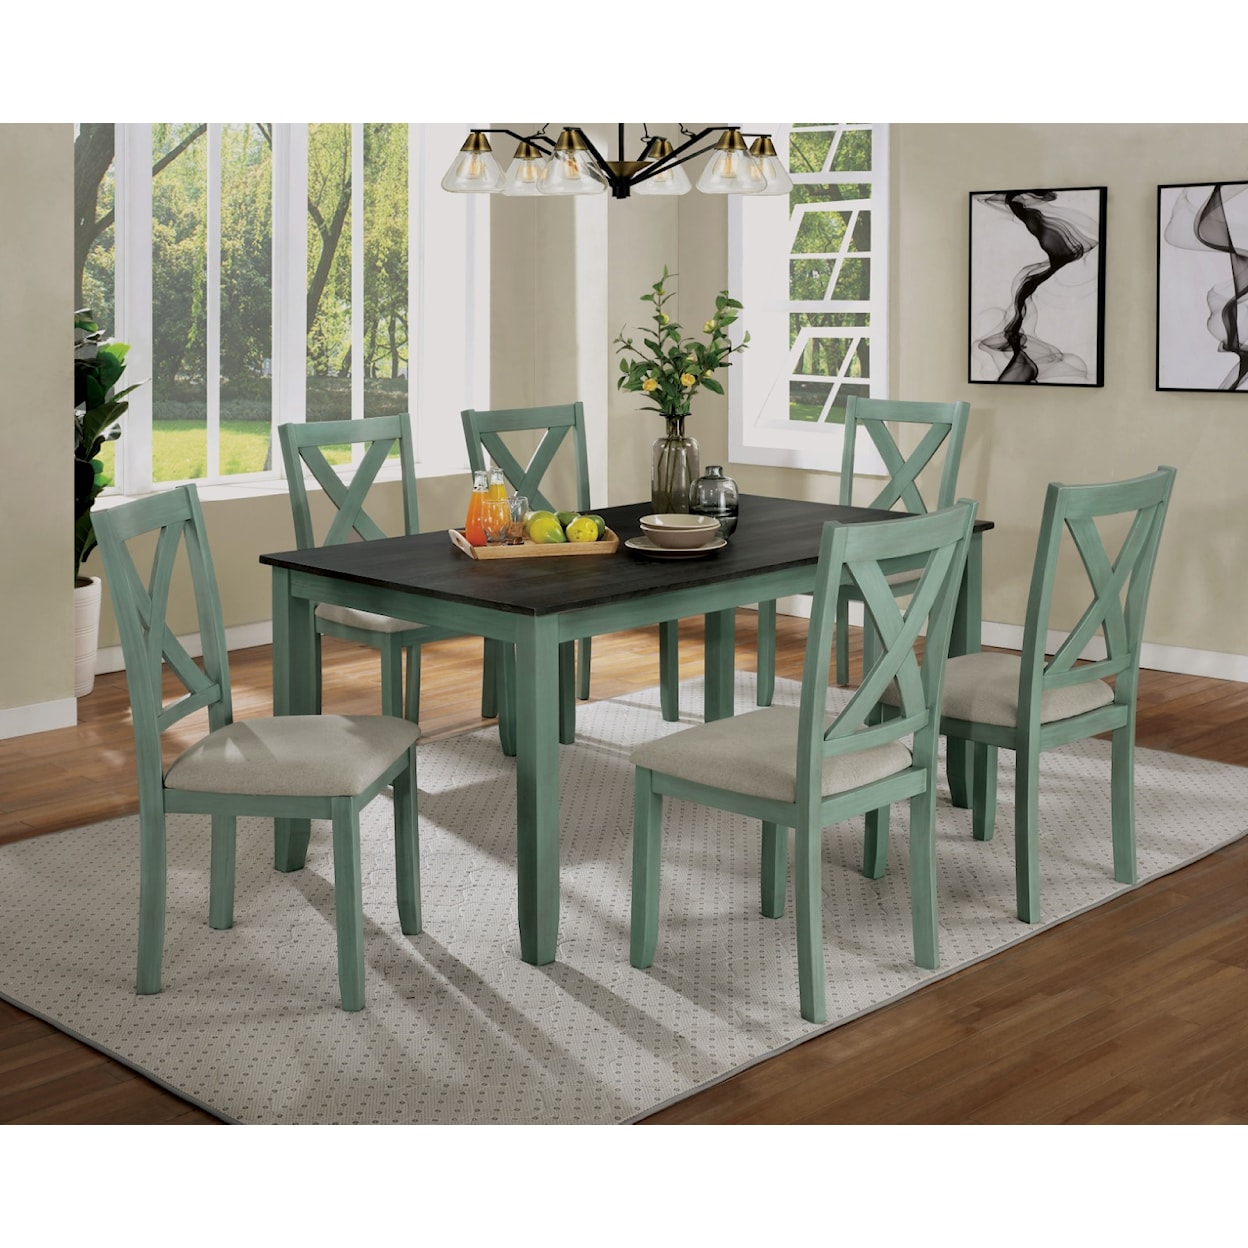 Furniture of America Anya 7-Piece Dining Table Set